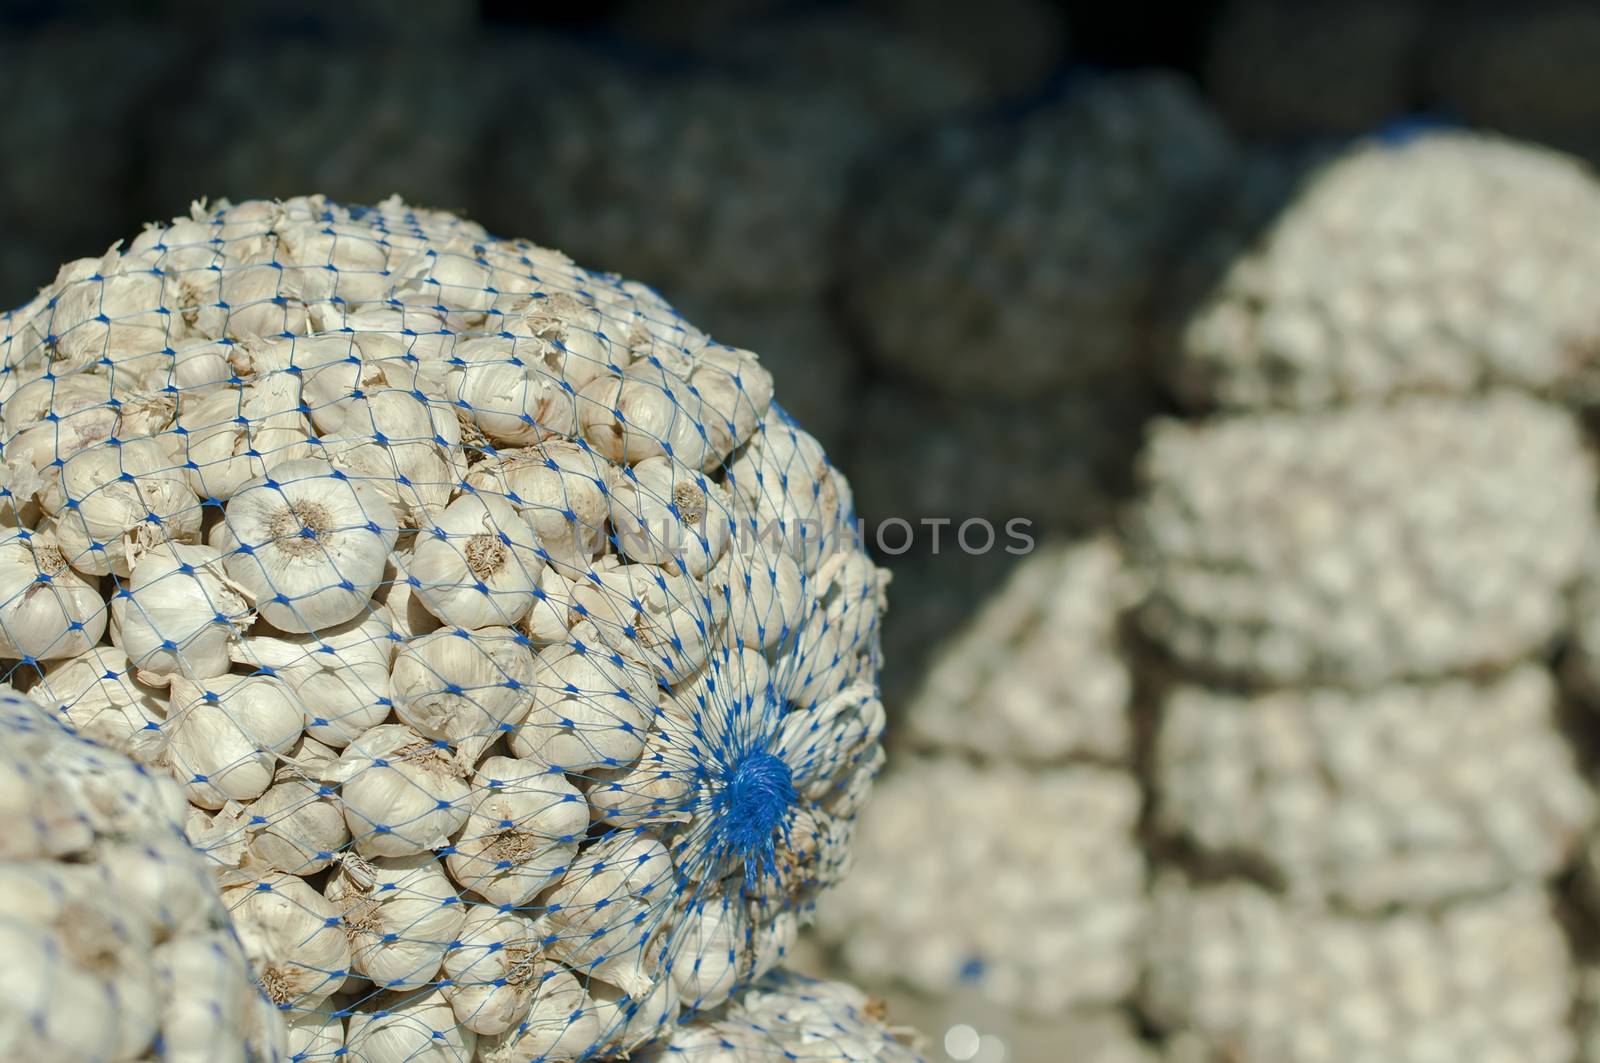 Mesh bag with garlic in Wholesale market